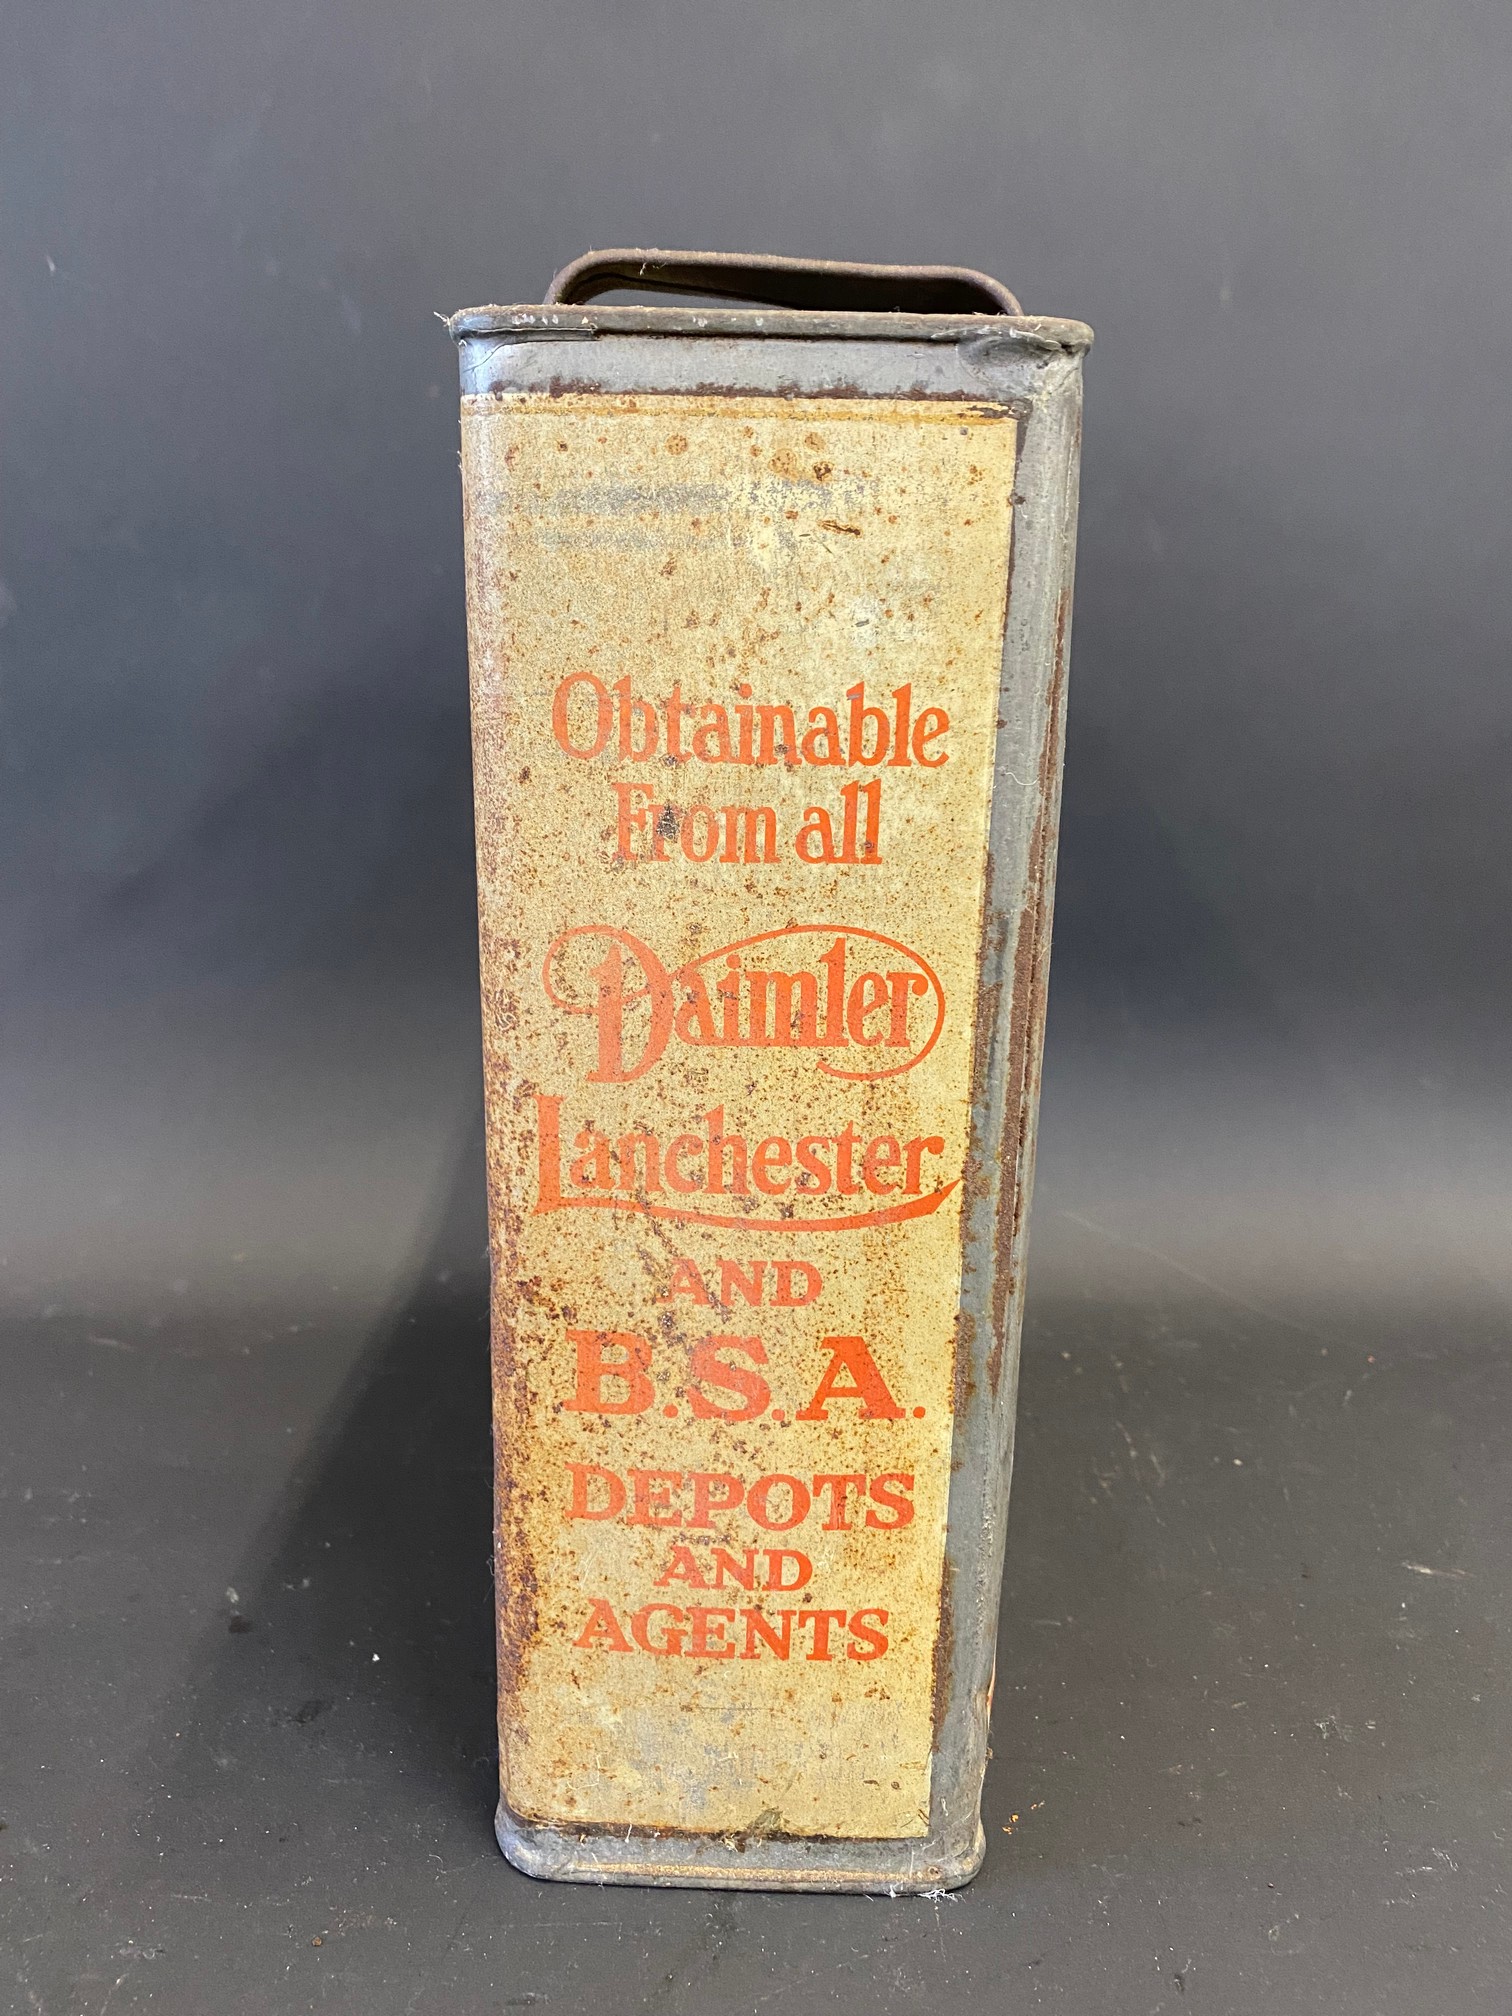 A self-changing oil for Daimler Lanchester & BSA cars gallon can. - Image 4 of 6